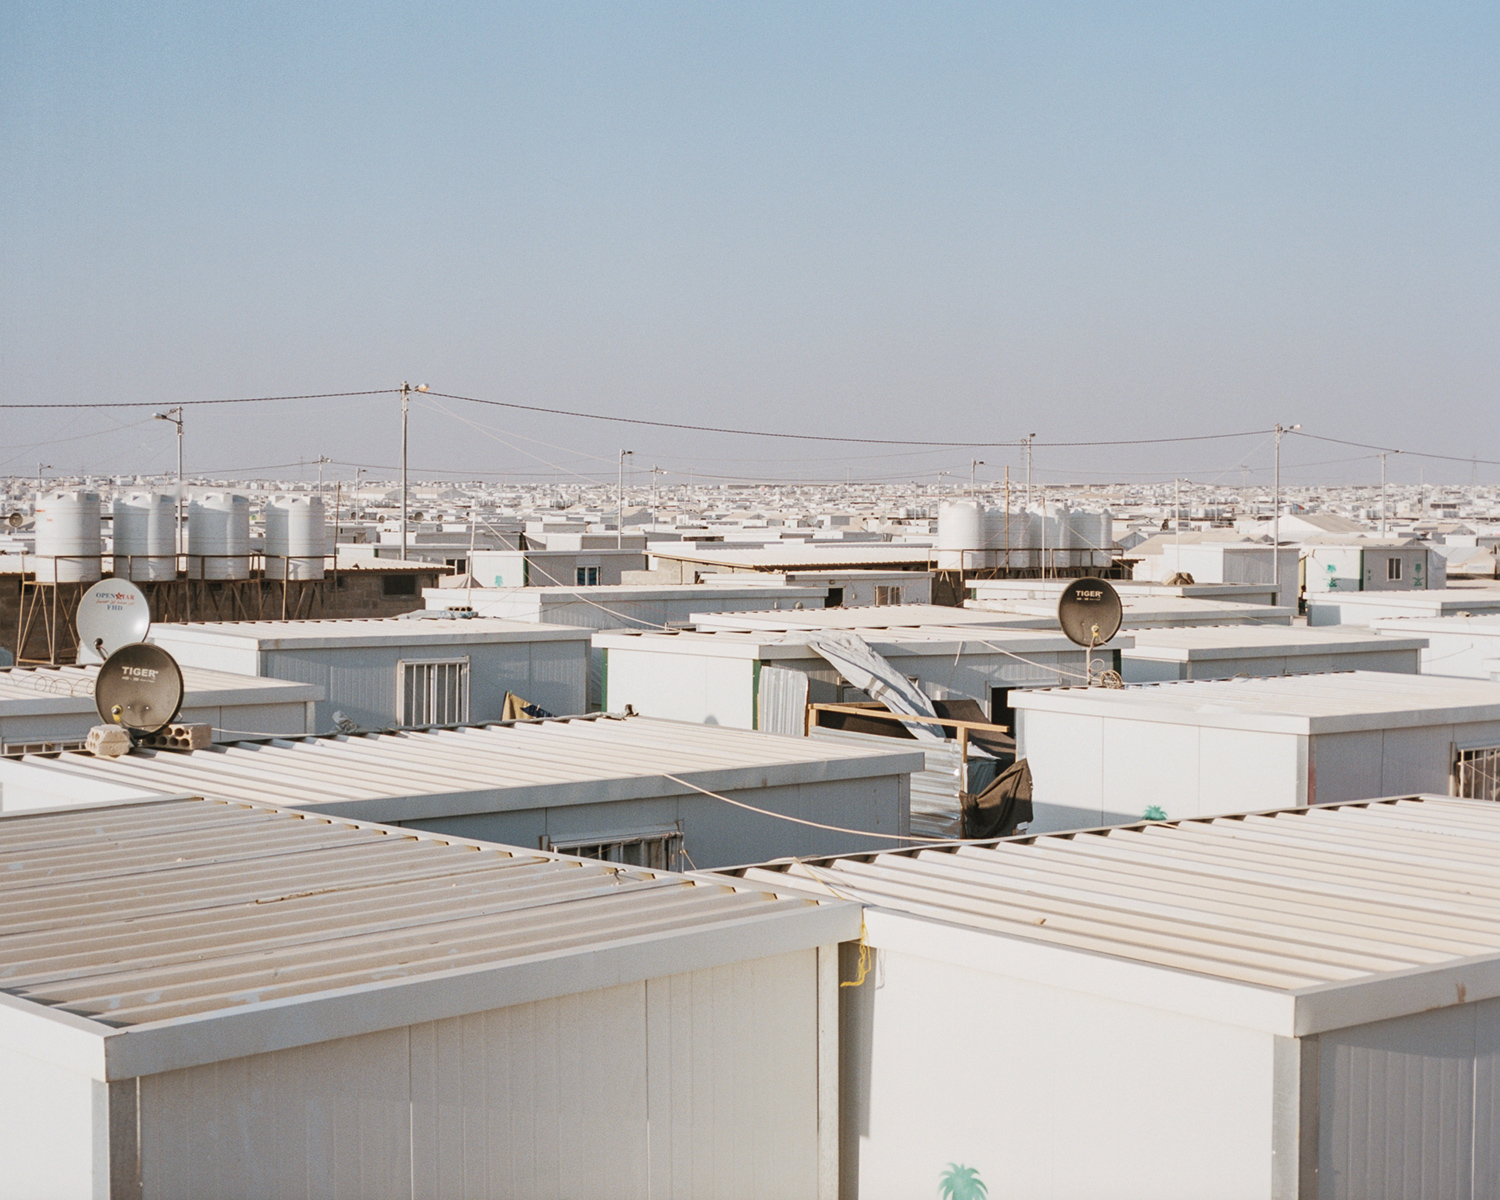 A view of Zaatari refugee camp from atop one of the approximately 16,500 containers that are being used as makeshift homes. The remaining 11,000 tents are being replaced before winter so that the entire camp will be made up of the containers.